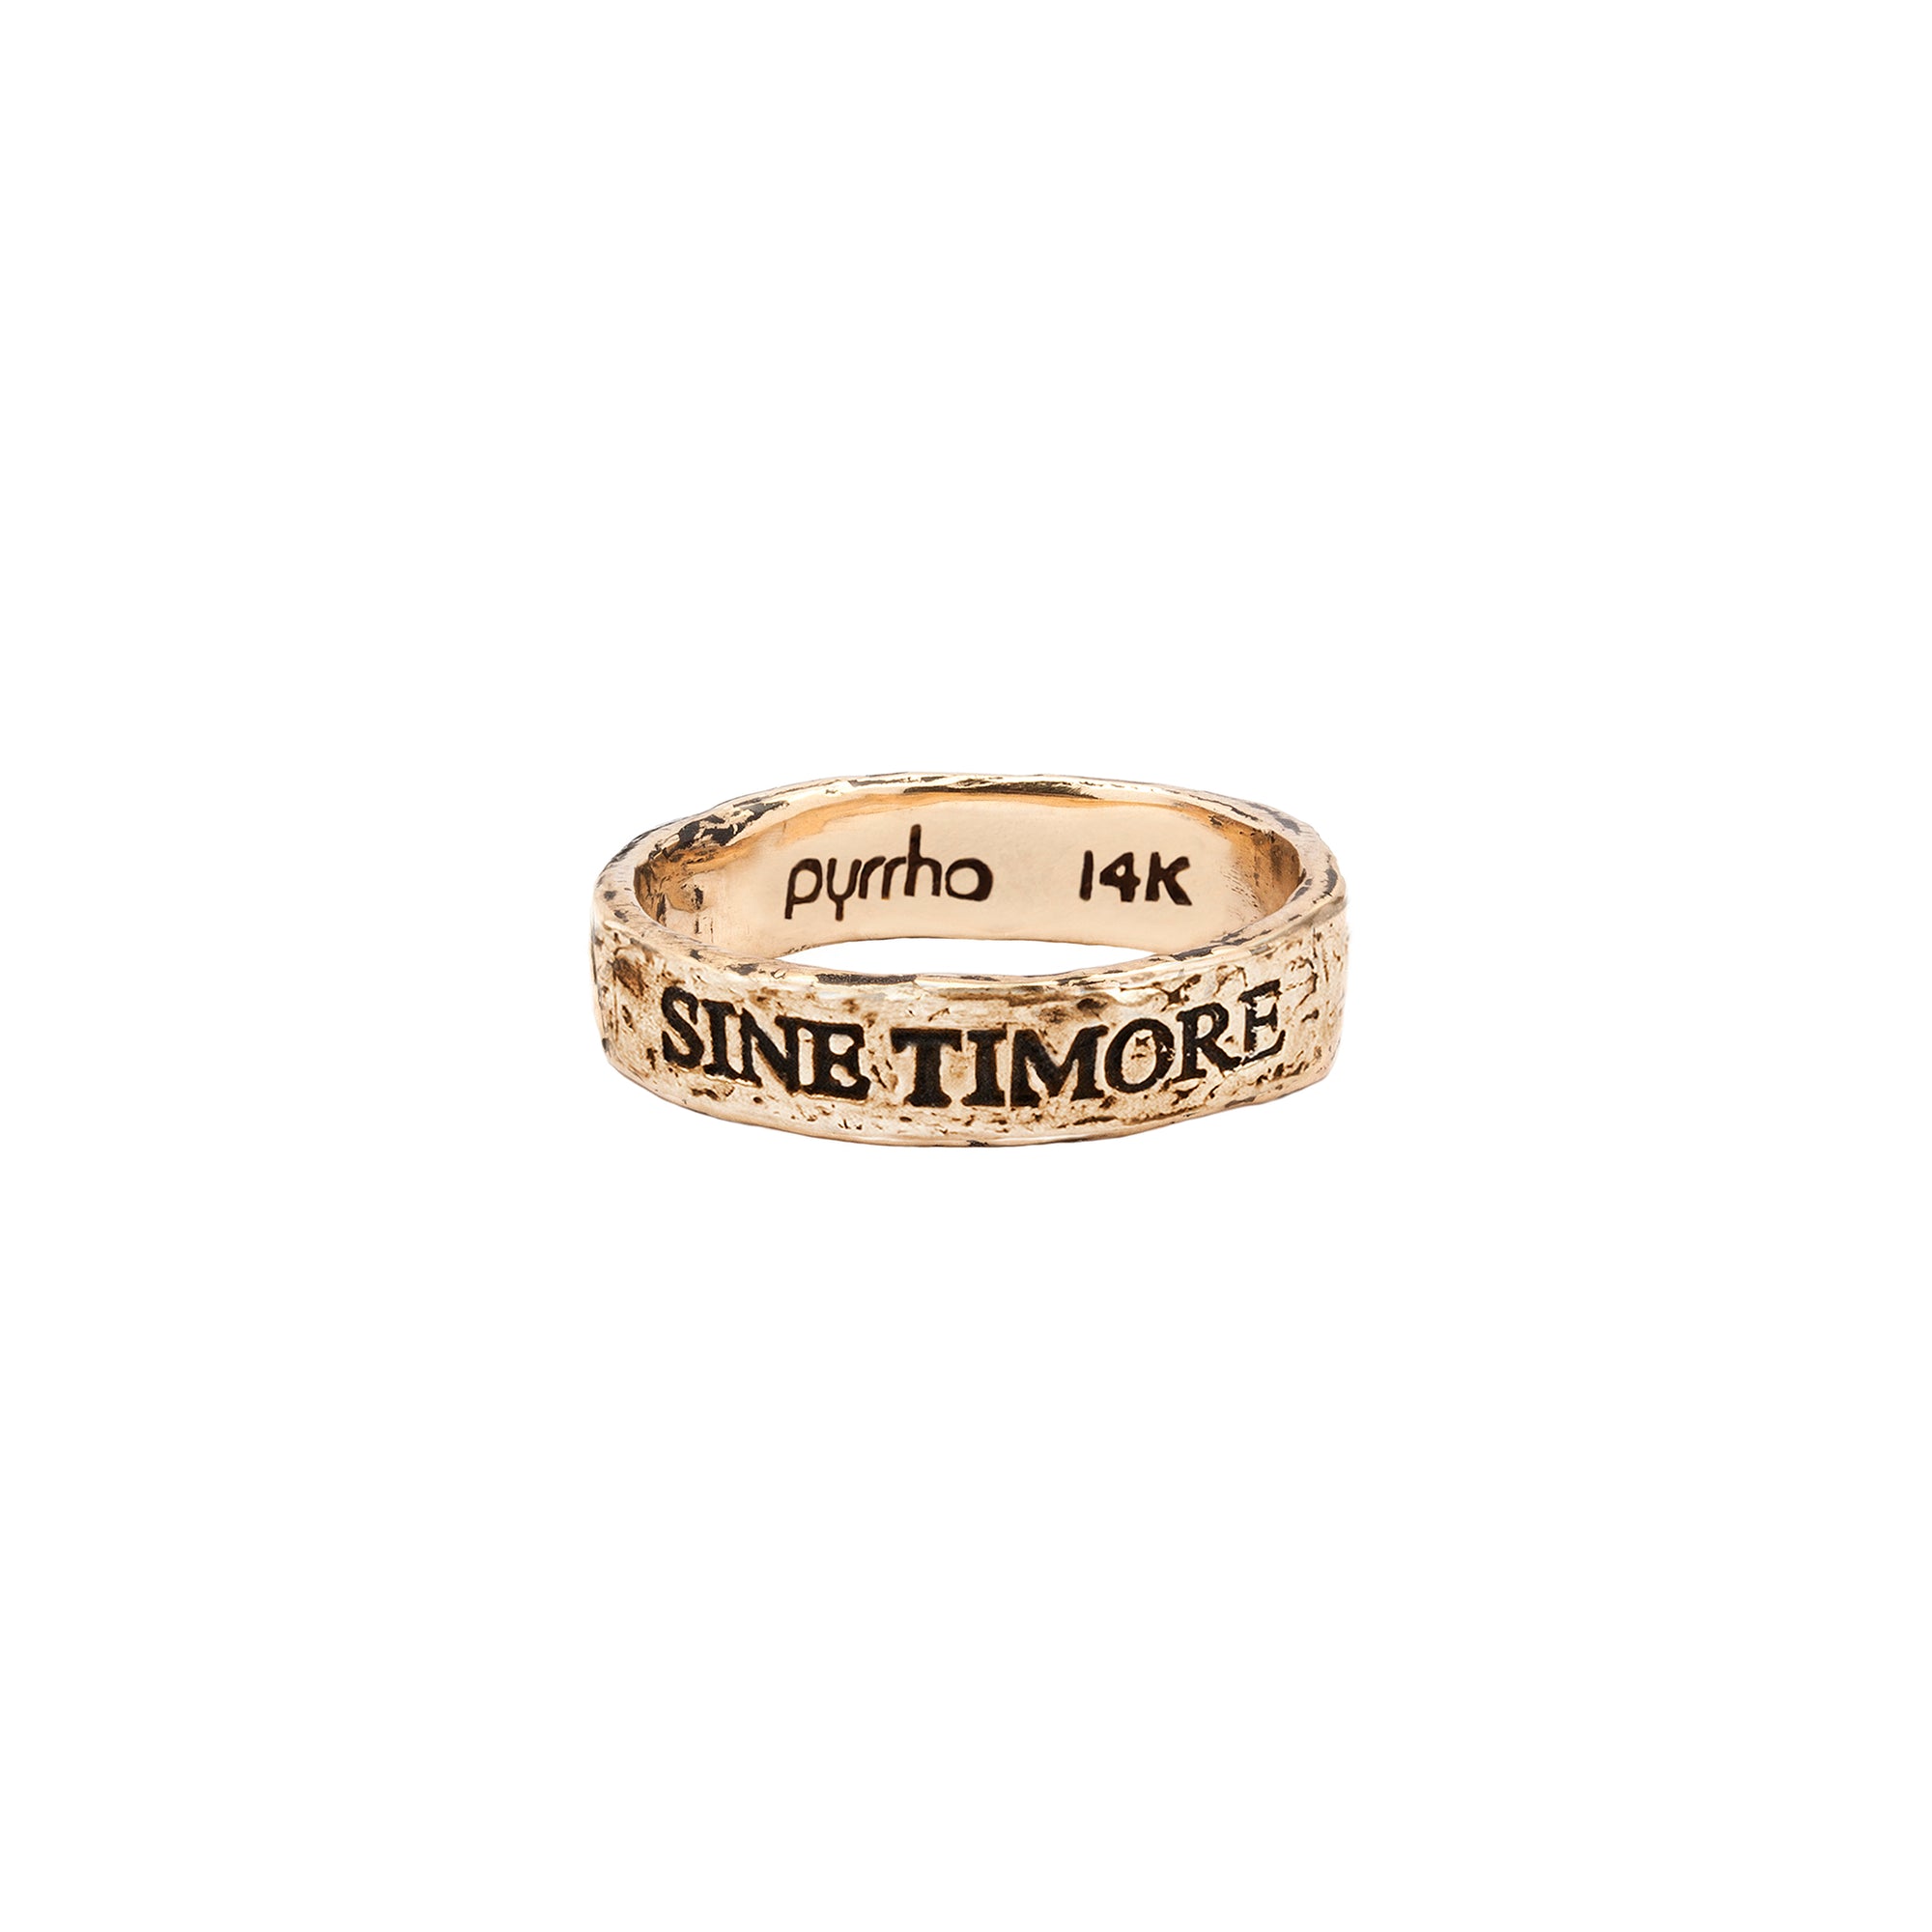 A 14k gold ring engraved with our Sine Timore motto.